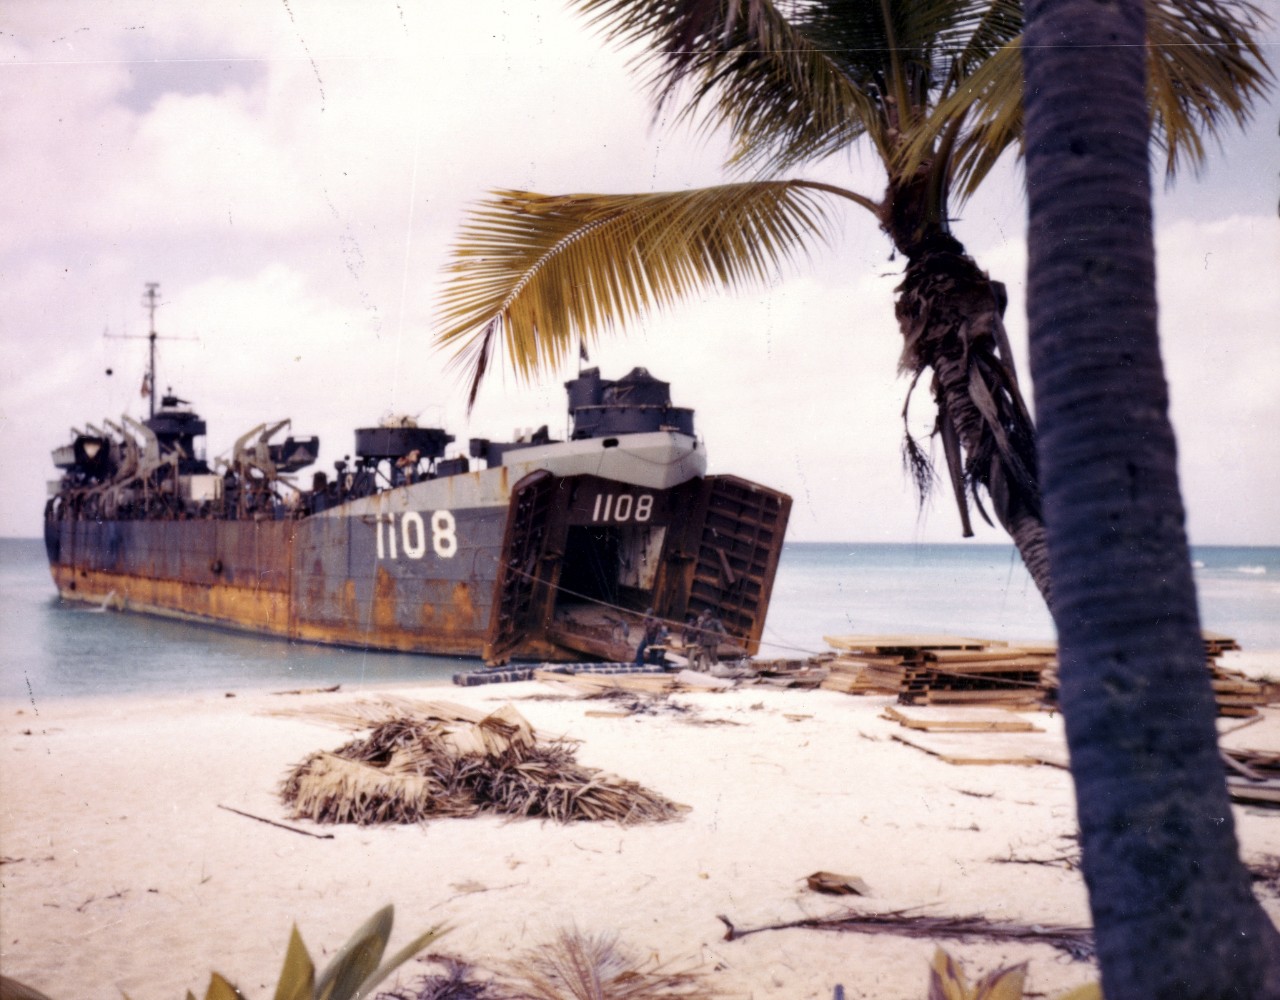 LST vessel arrives on a beach, palm tree in foreground